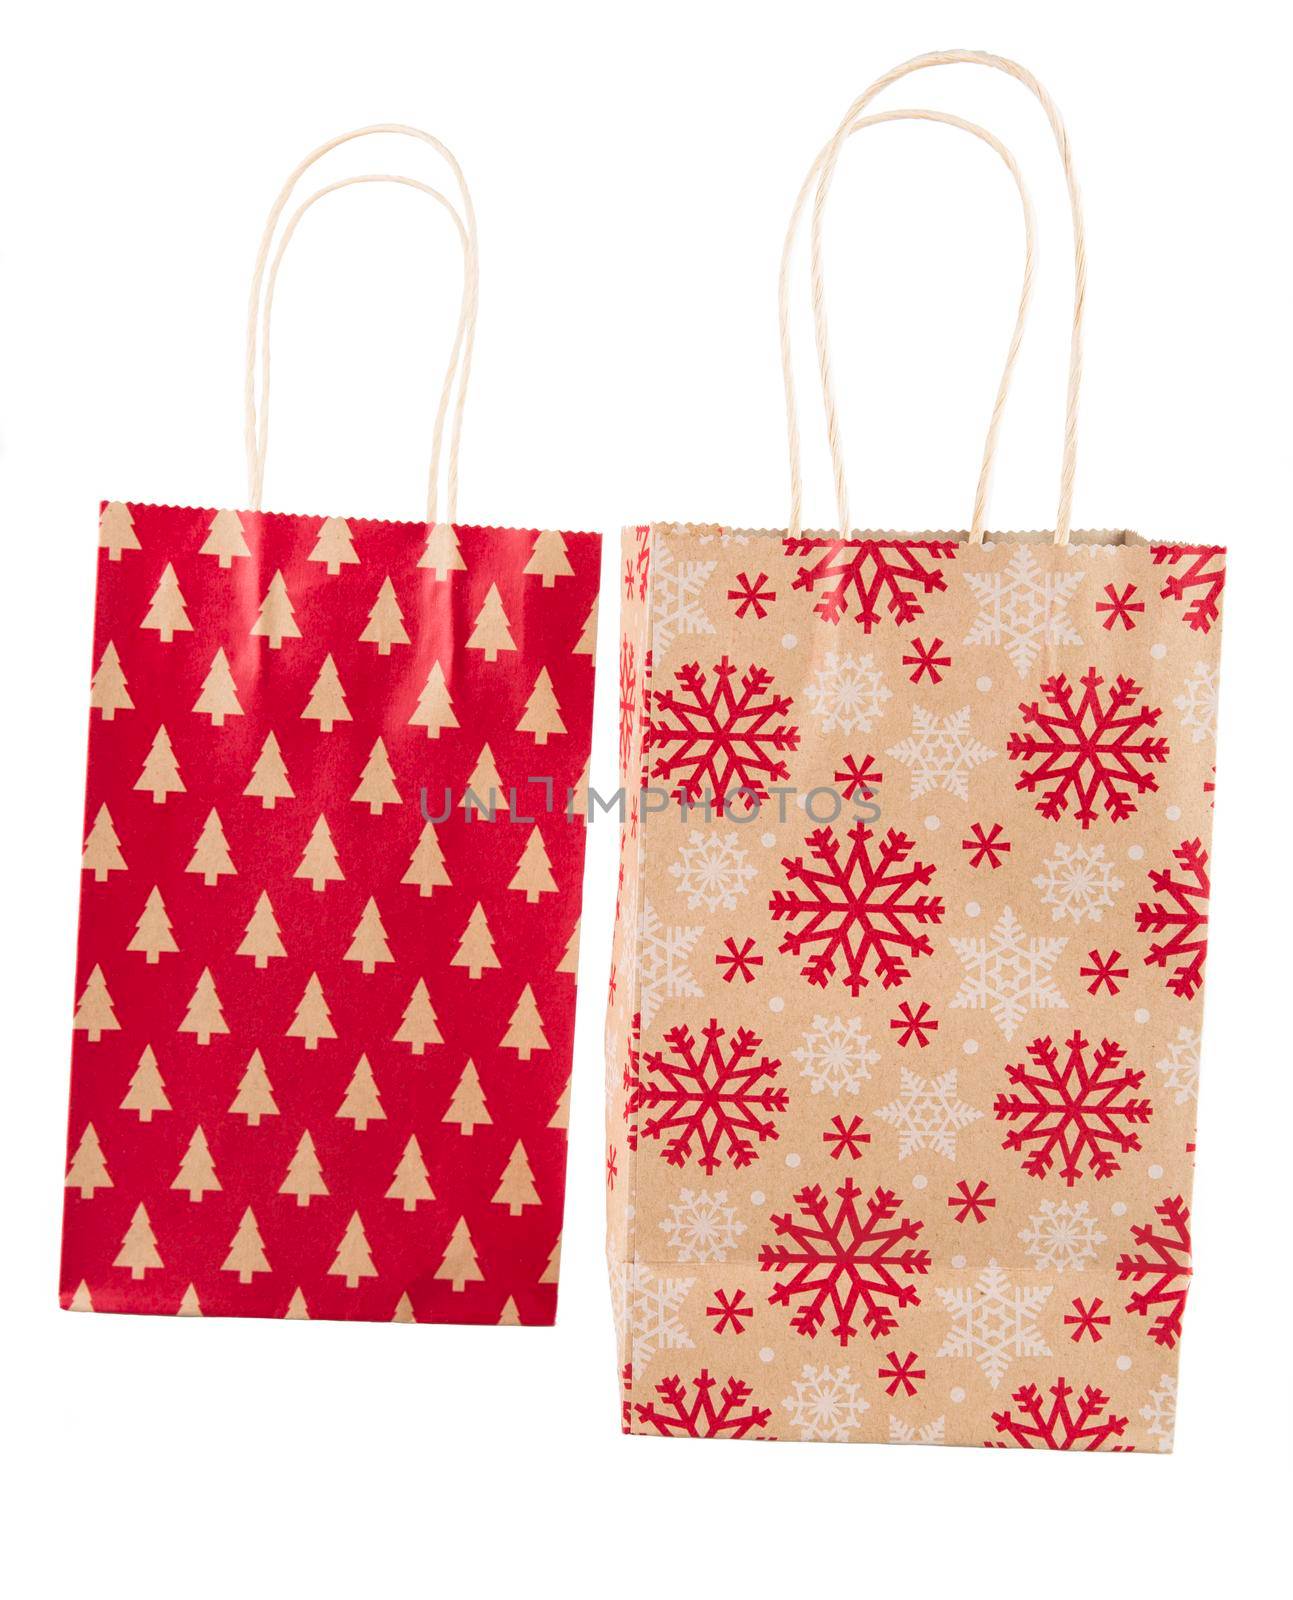 Two holiday gift bags isolated on white background